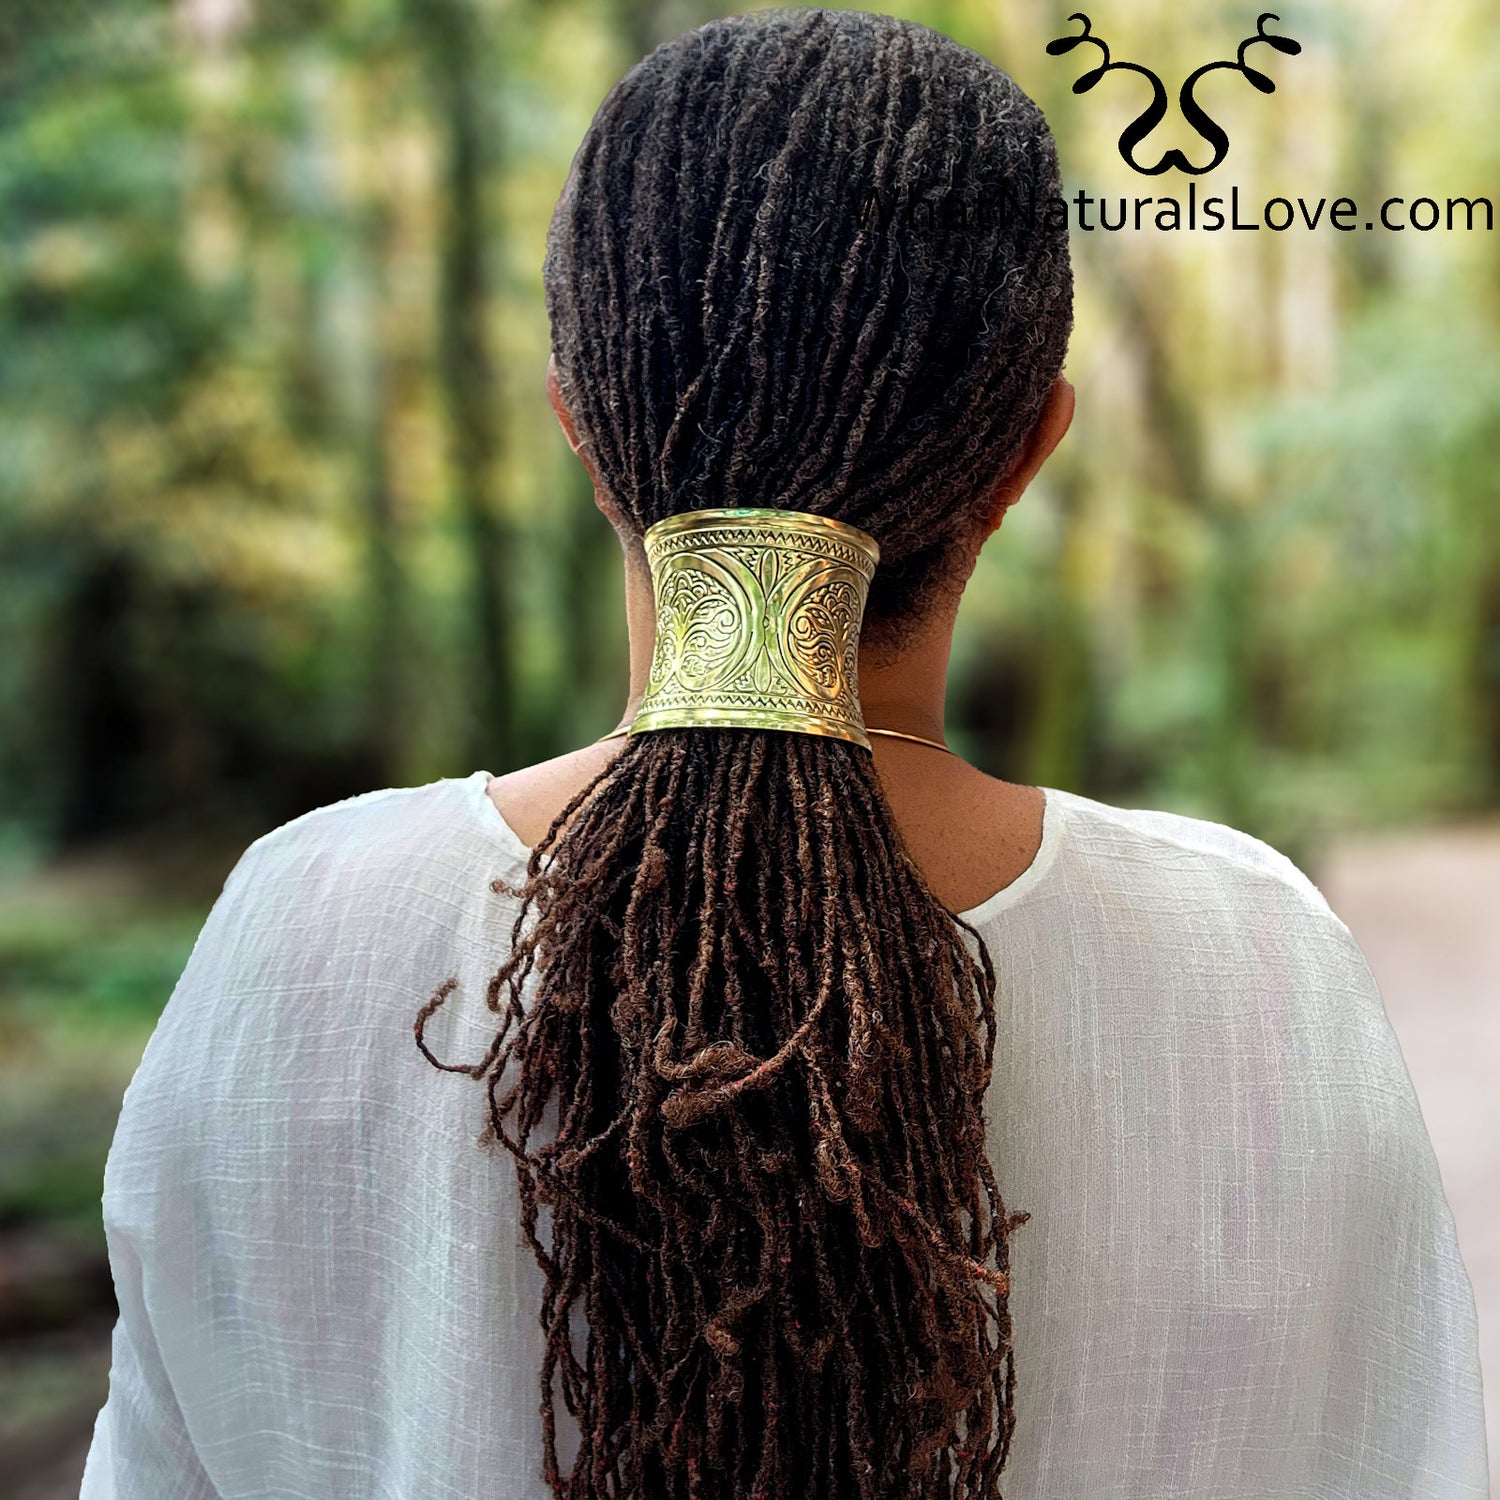 Adjustable Non-damaging Hair Cuff for Locs, Sisterlocks, Dreadlocks and Braids Classic Perfect for Mother&